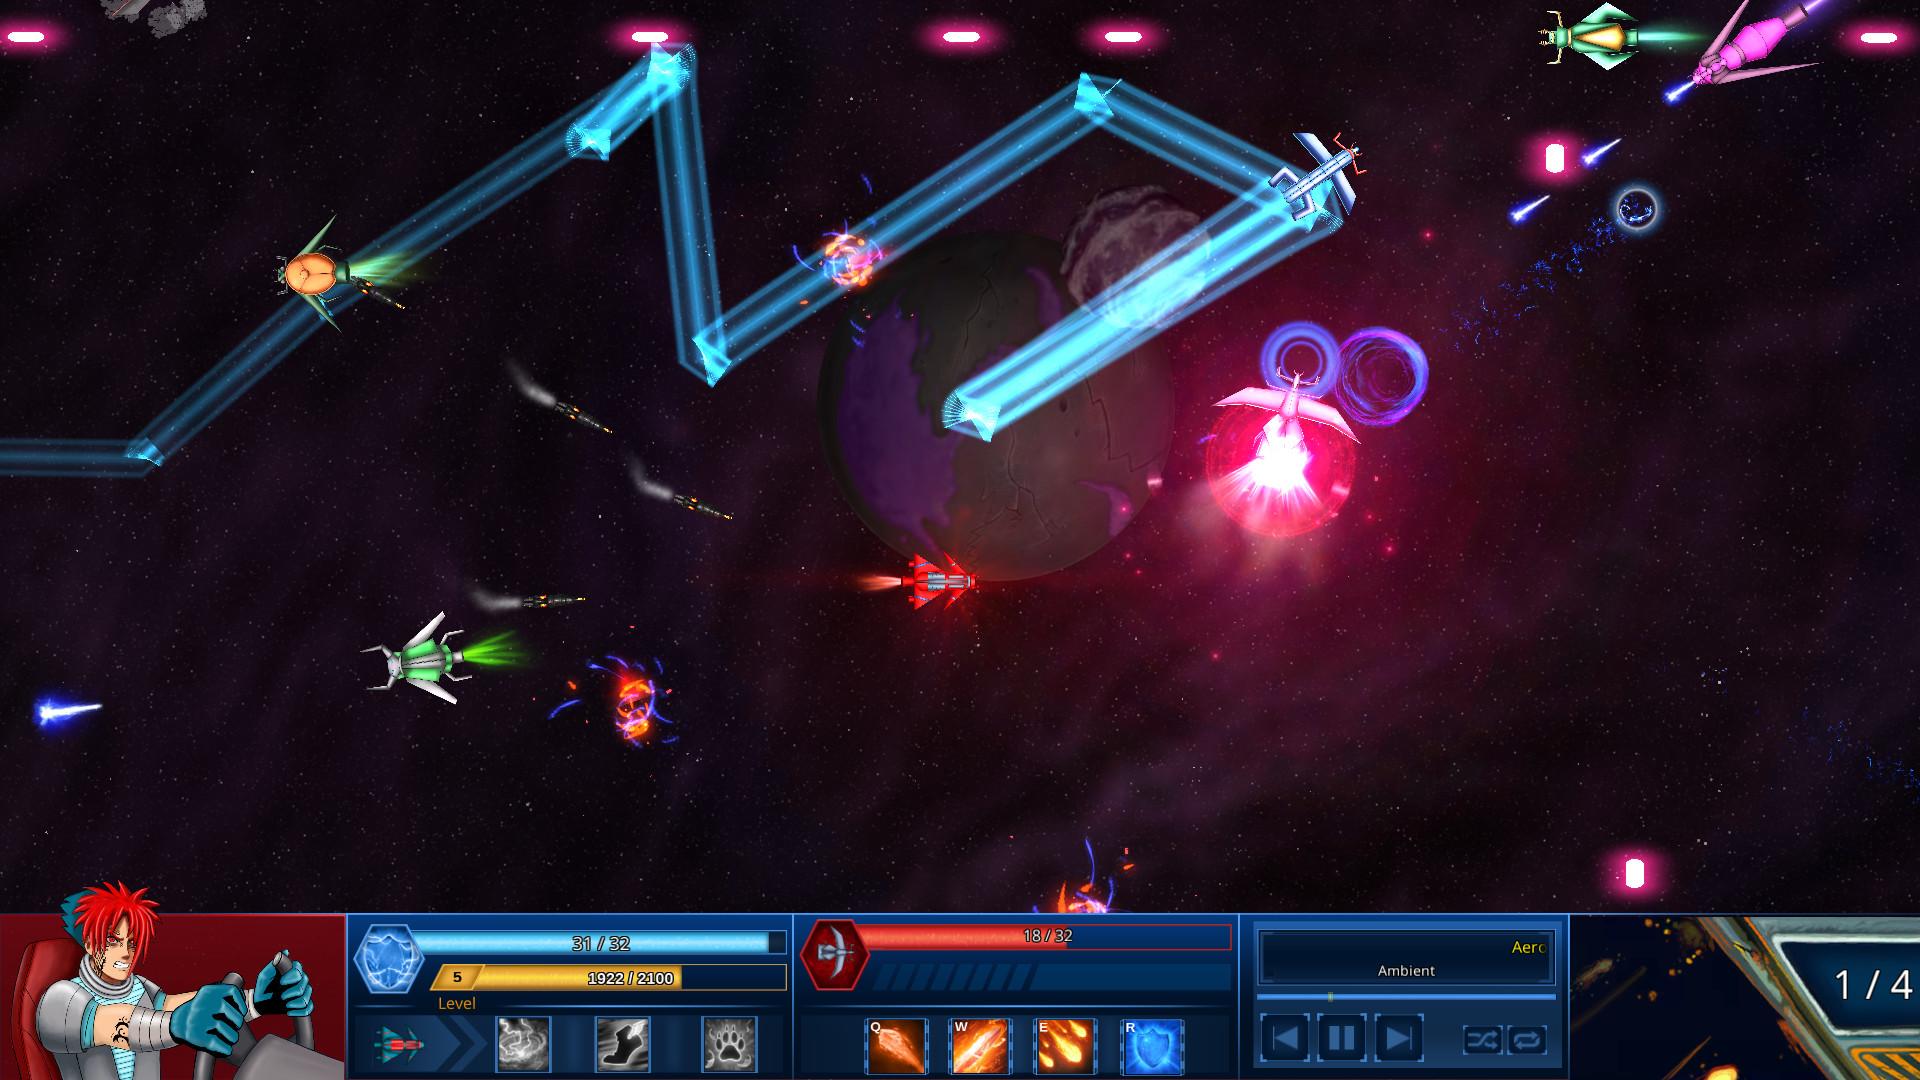 Screenshot №26 from game Survive in Space